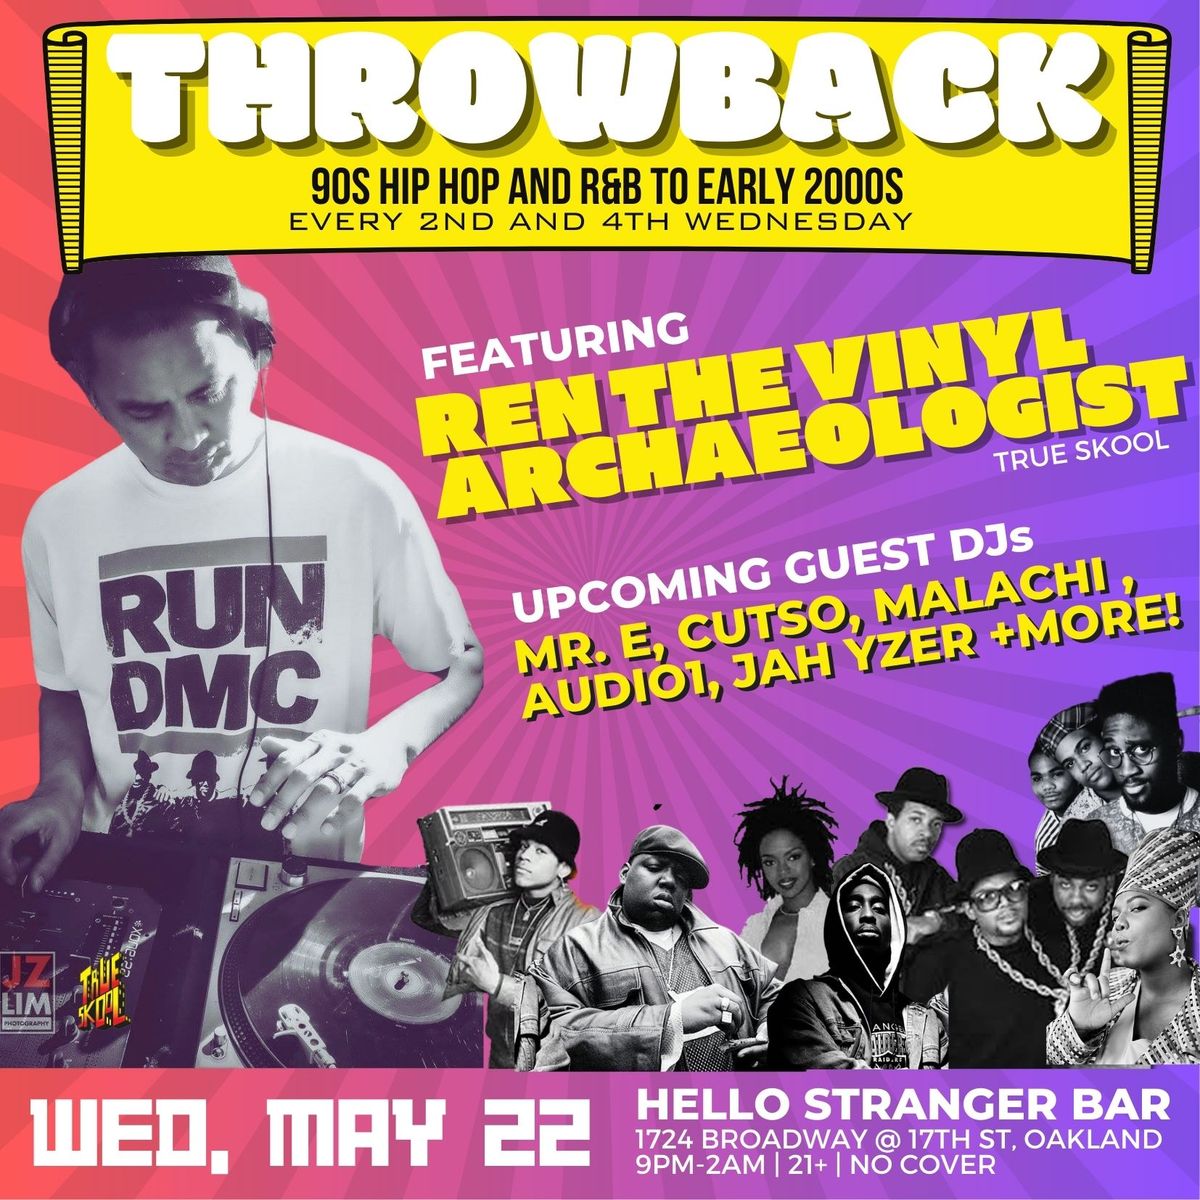 THROWBACK (90s Hip Hop & R&B to early 2000s) with Ren the Vinyl Archaeologist and special guest DJs